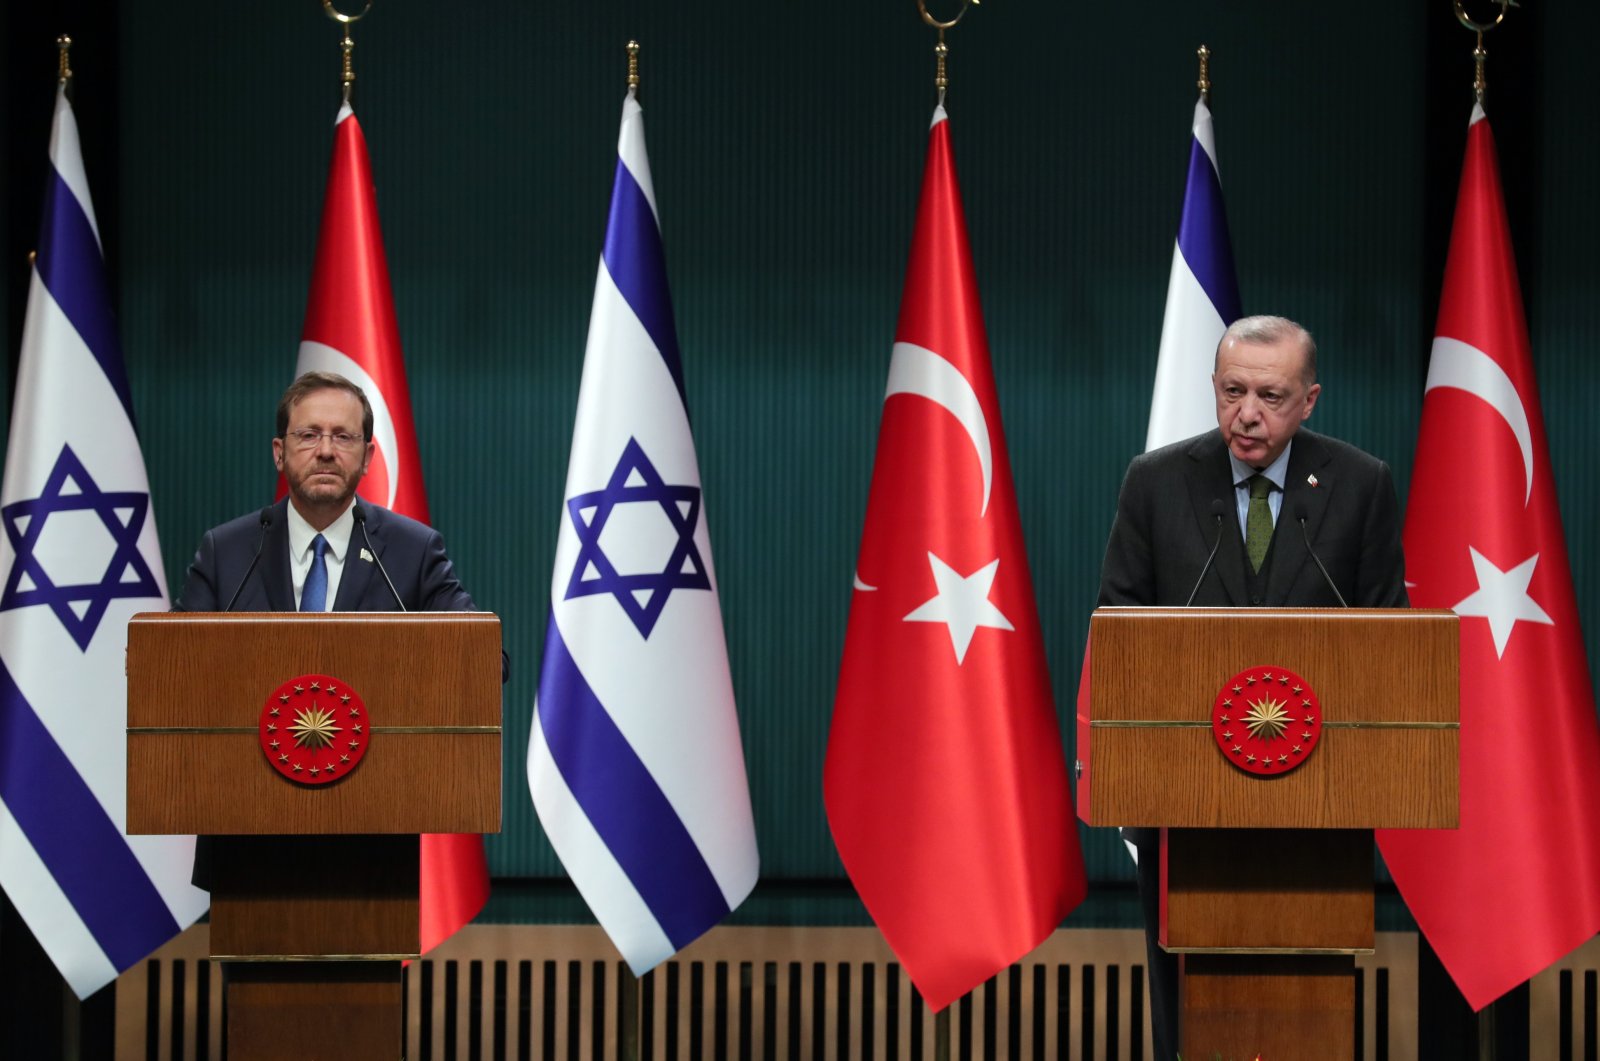 President Recep Tayyip Erdoğan (R) and his Israeli counterpart Isaac Herzog hold a joint news conference in capital Ankara, Turkey, March 9, 2022. (AA Photo)